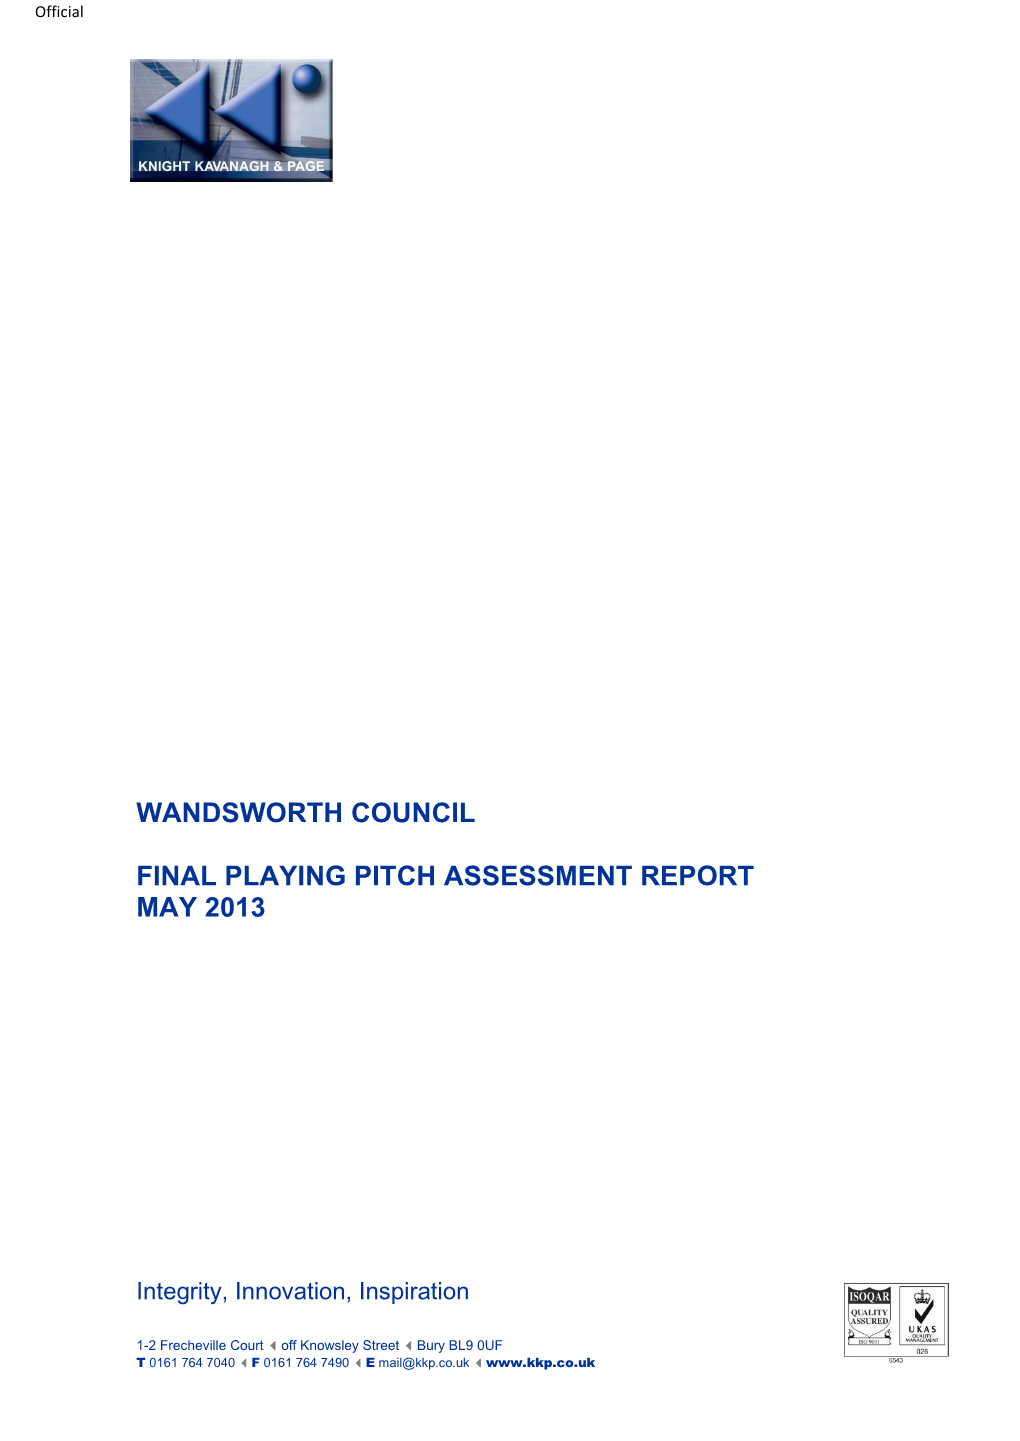 Wandsworth Council Final Playing Pitch Assessment Report May 2013